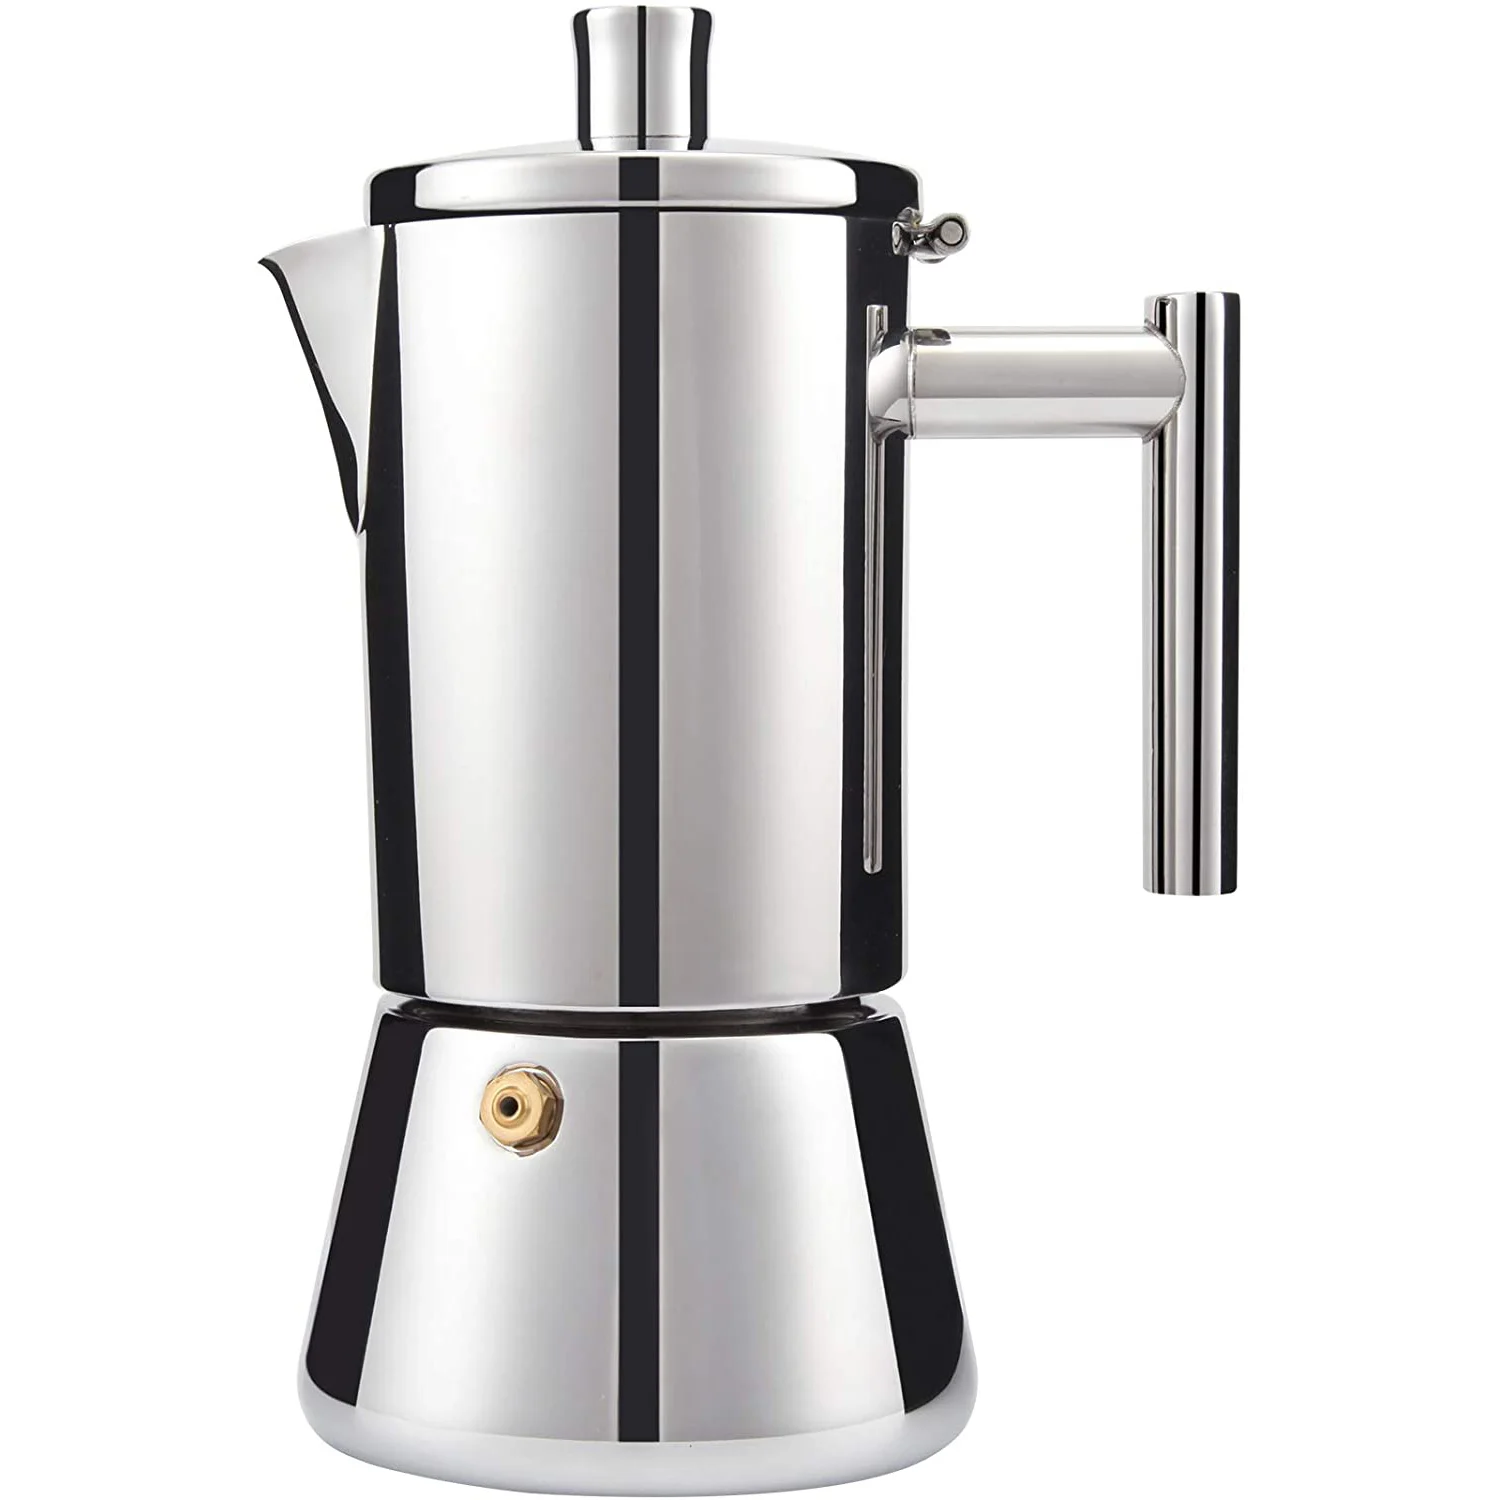 Unique Durable Coffee Kettle Stainless Steel Espresso Percolator for Home 